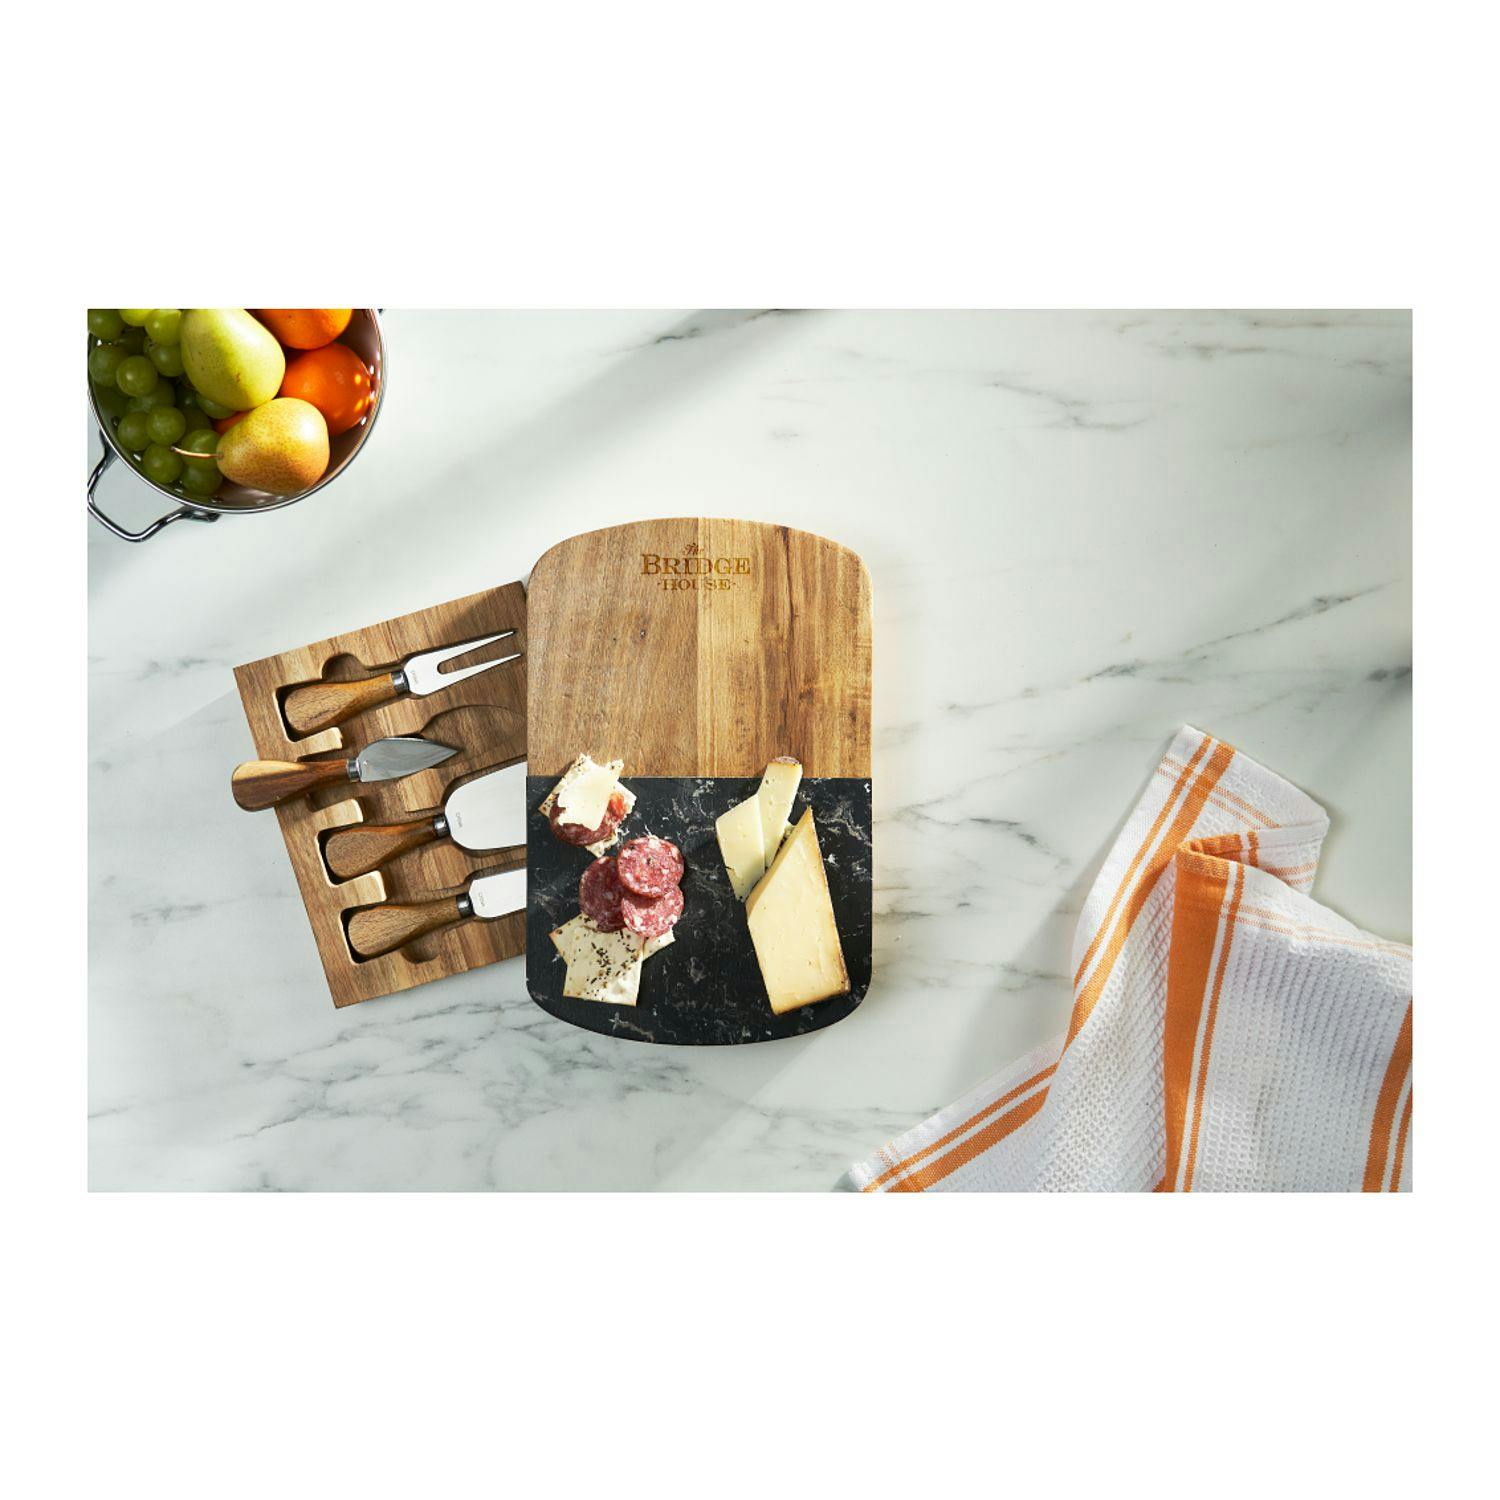 Black Marble Cheese Board Set with Knives - additional Image 5